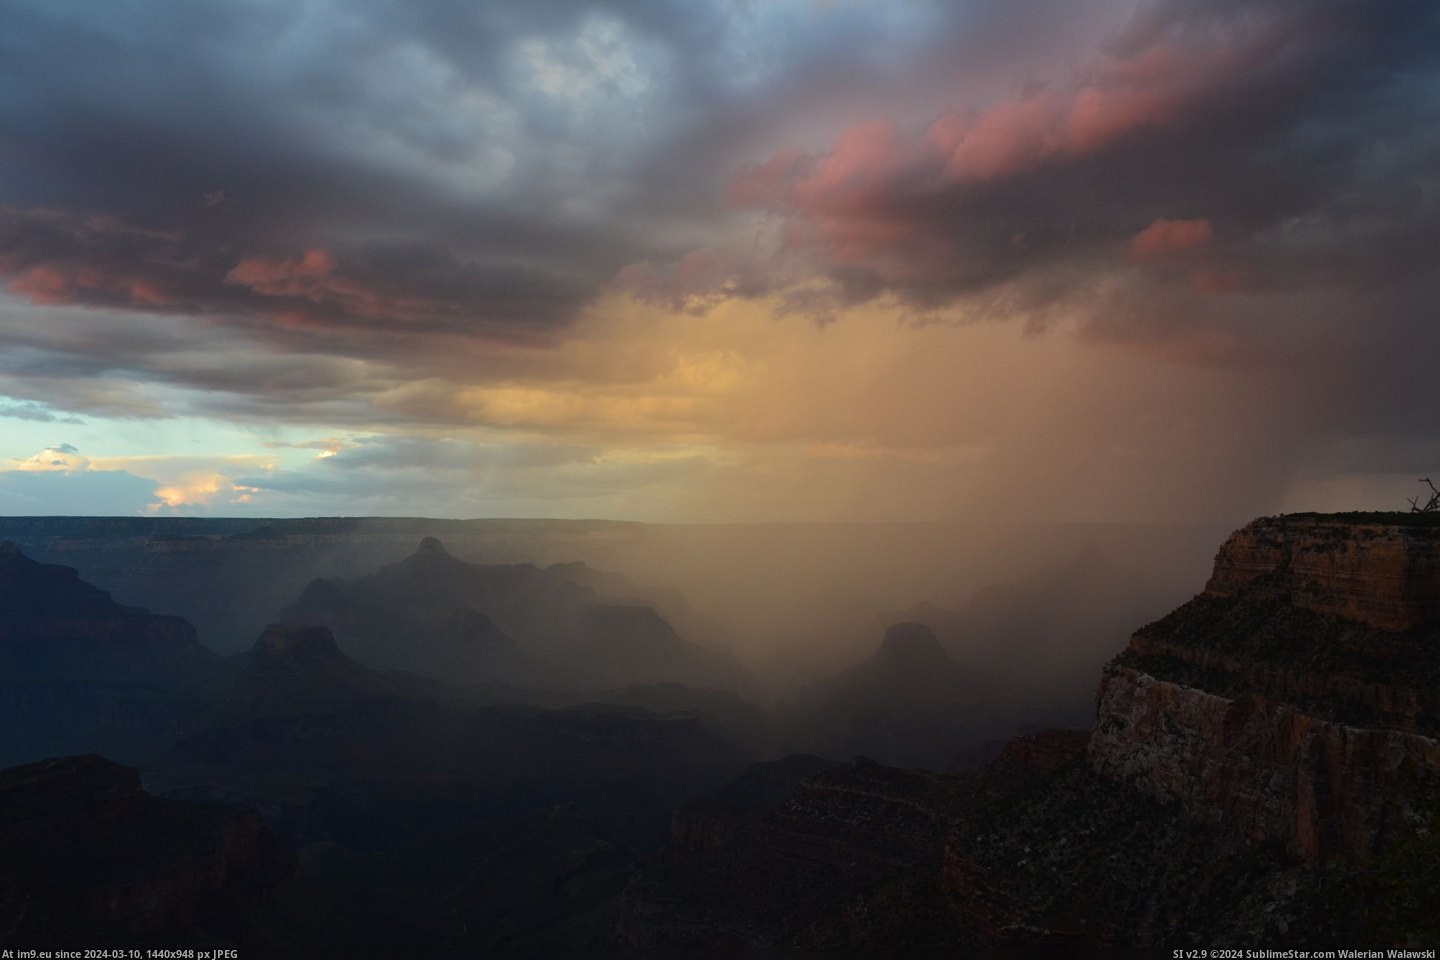 #Sunset #Canyon #Passing #2956x1958 #Grand #Storm [Earthporn] A storm passing through the Grand Canyon at sunset. [OC][2956x1958] Pic. (Image of album My r/EARTHPORN favs))